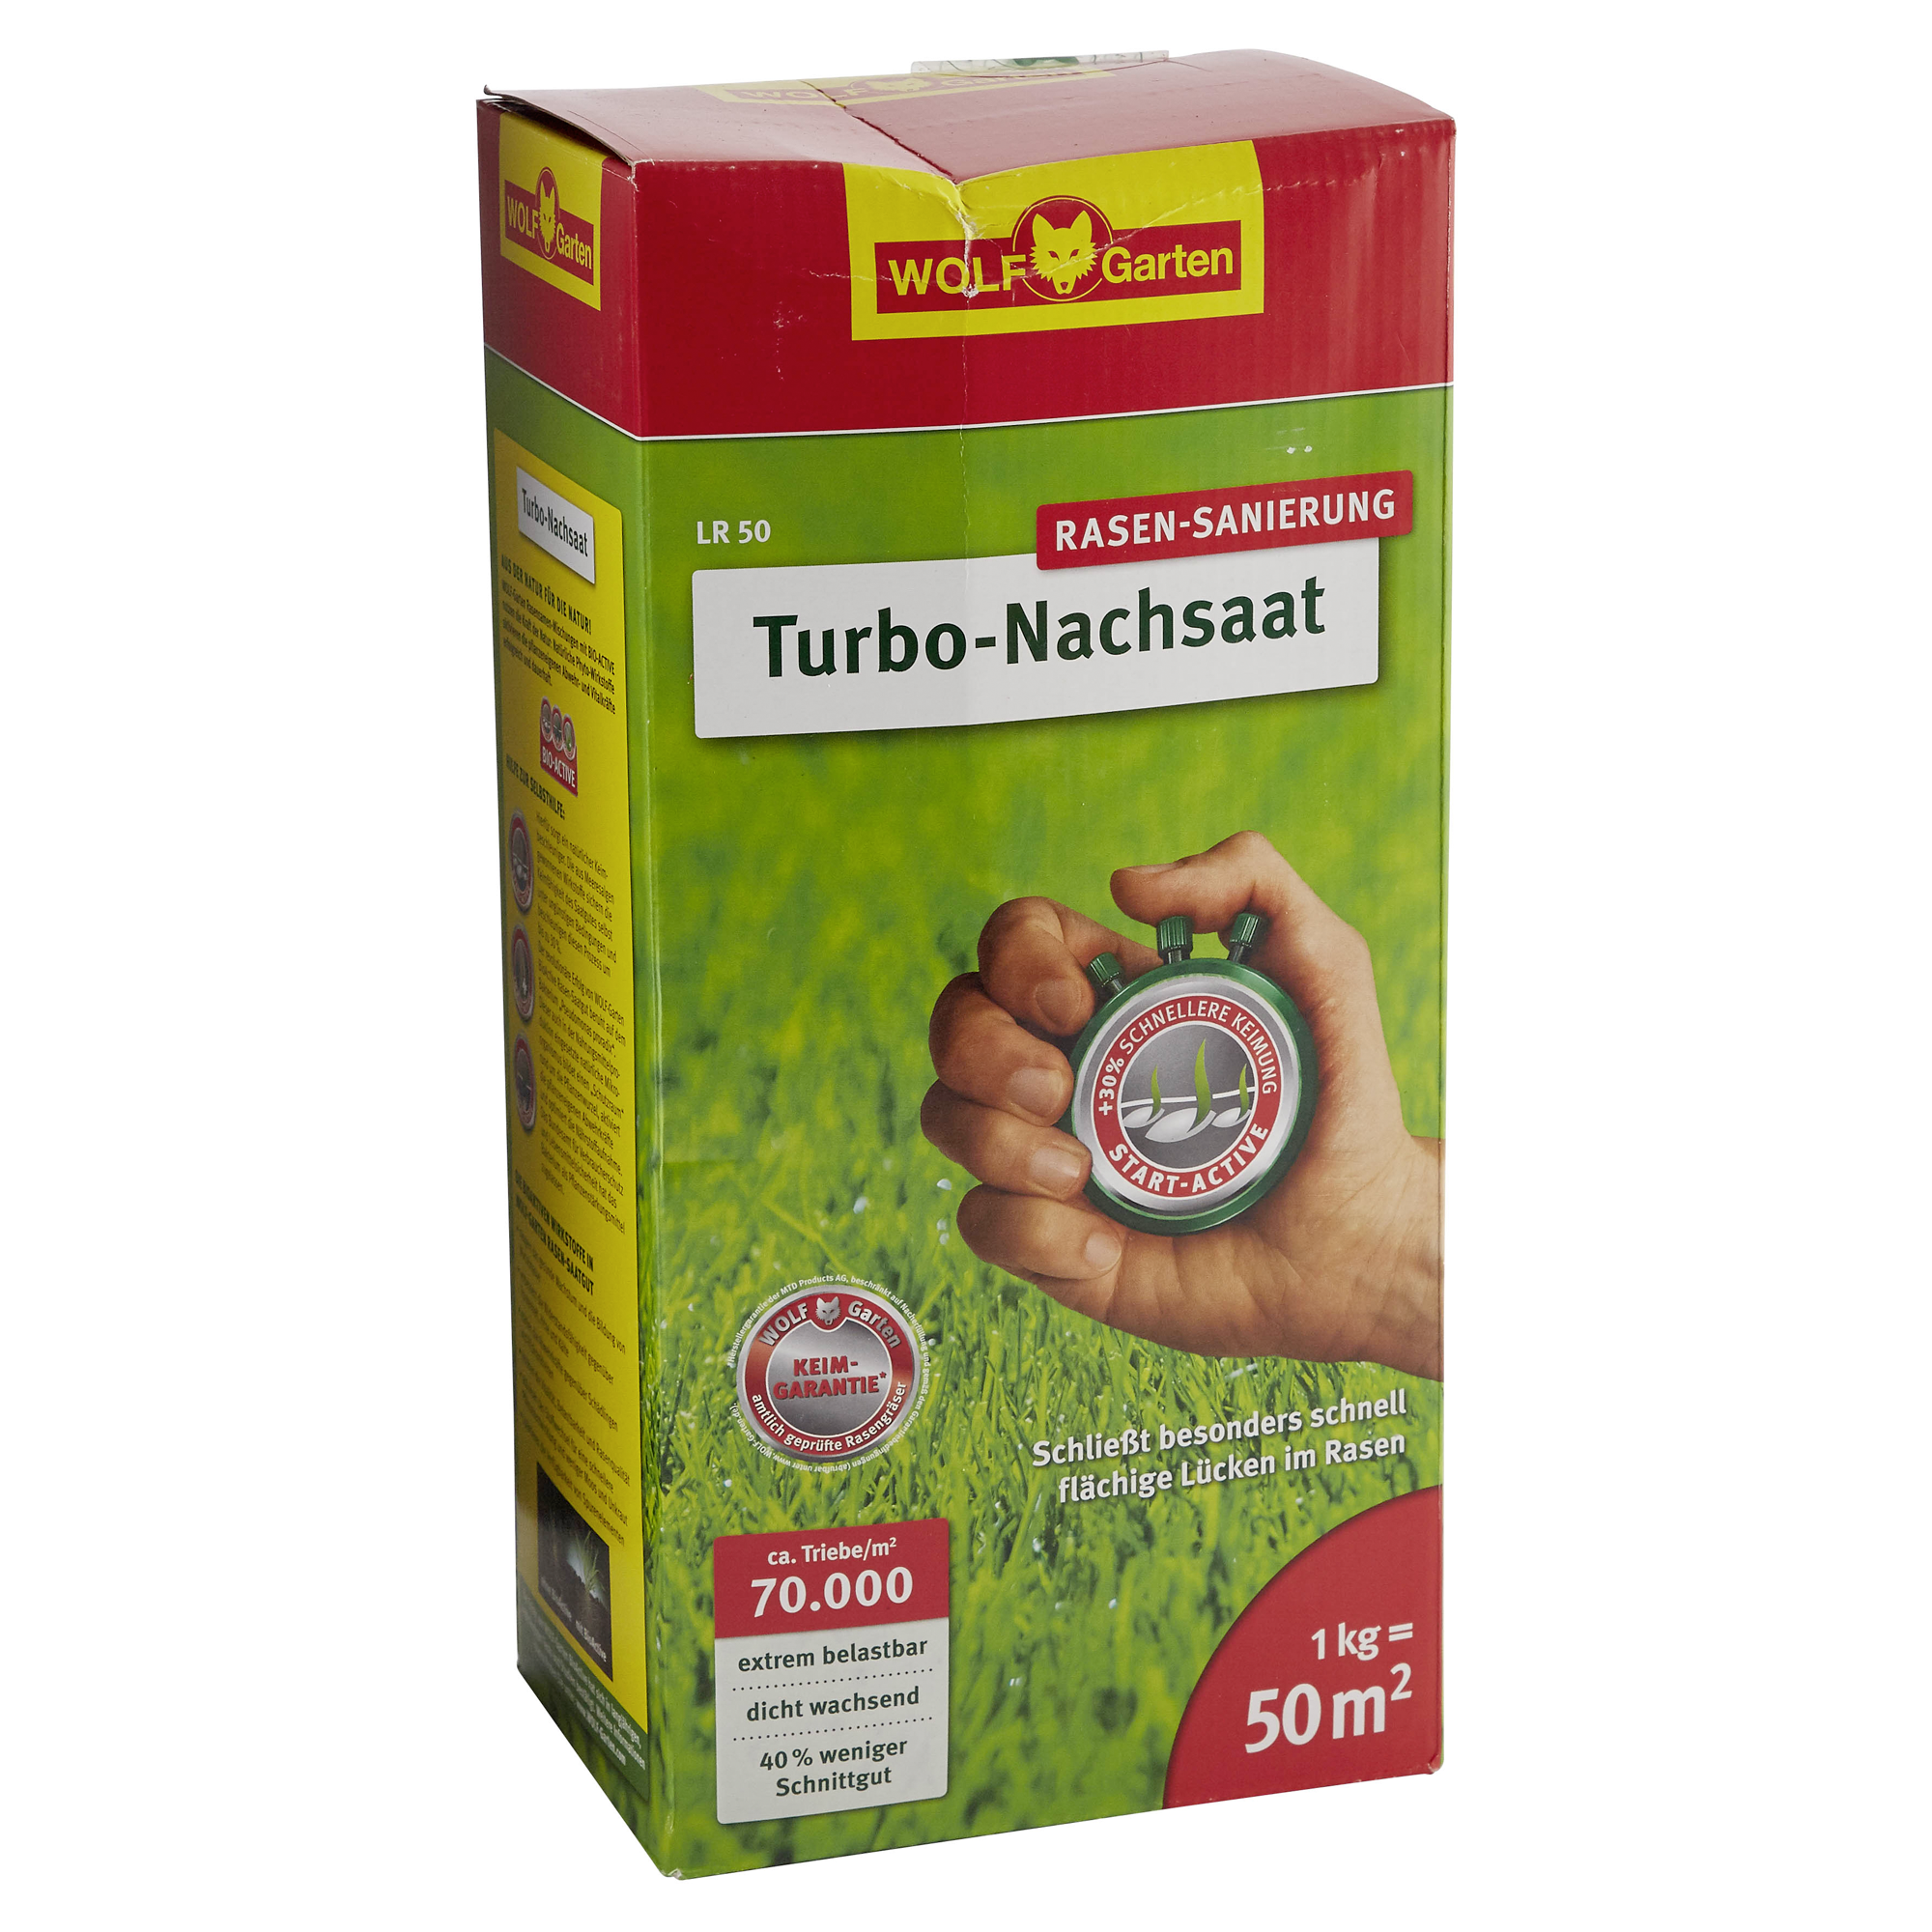 Turbo-Nachsaat 50 m² 1 kg + product picture